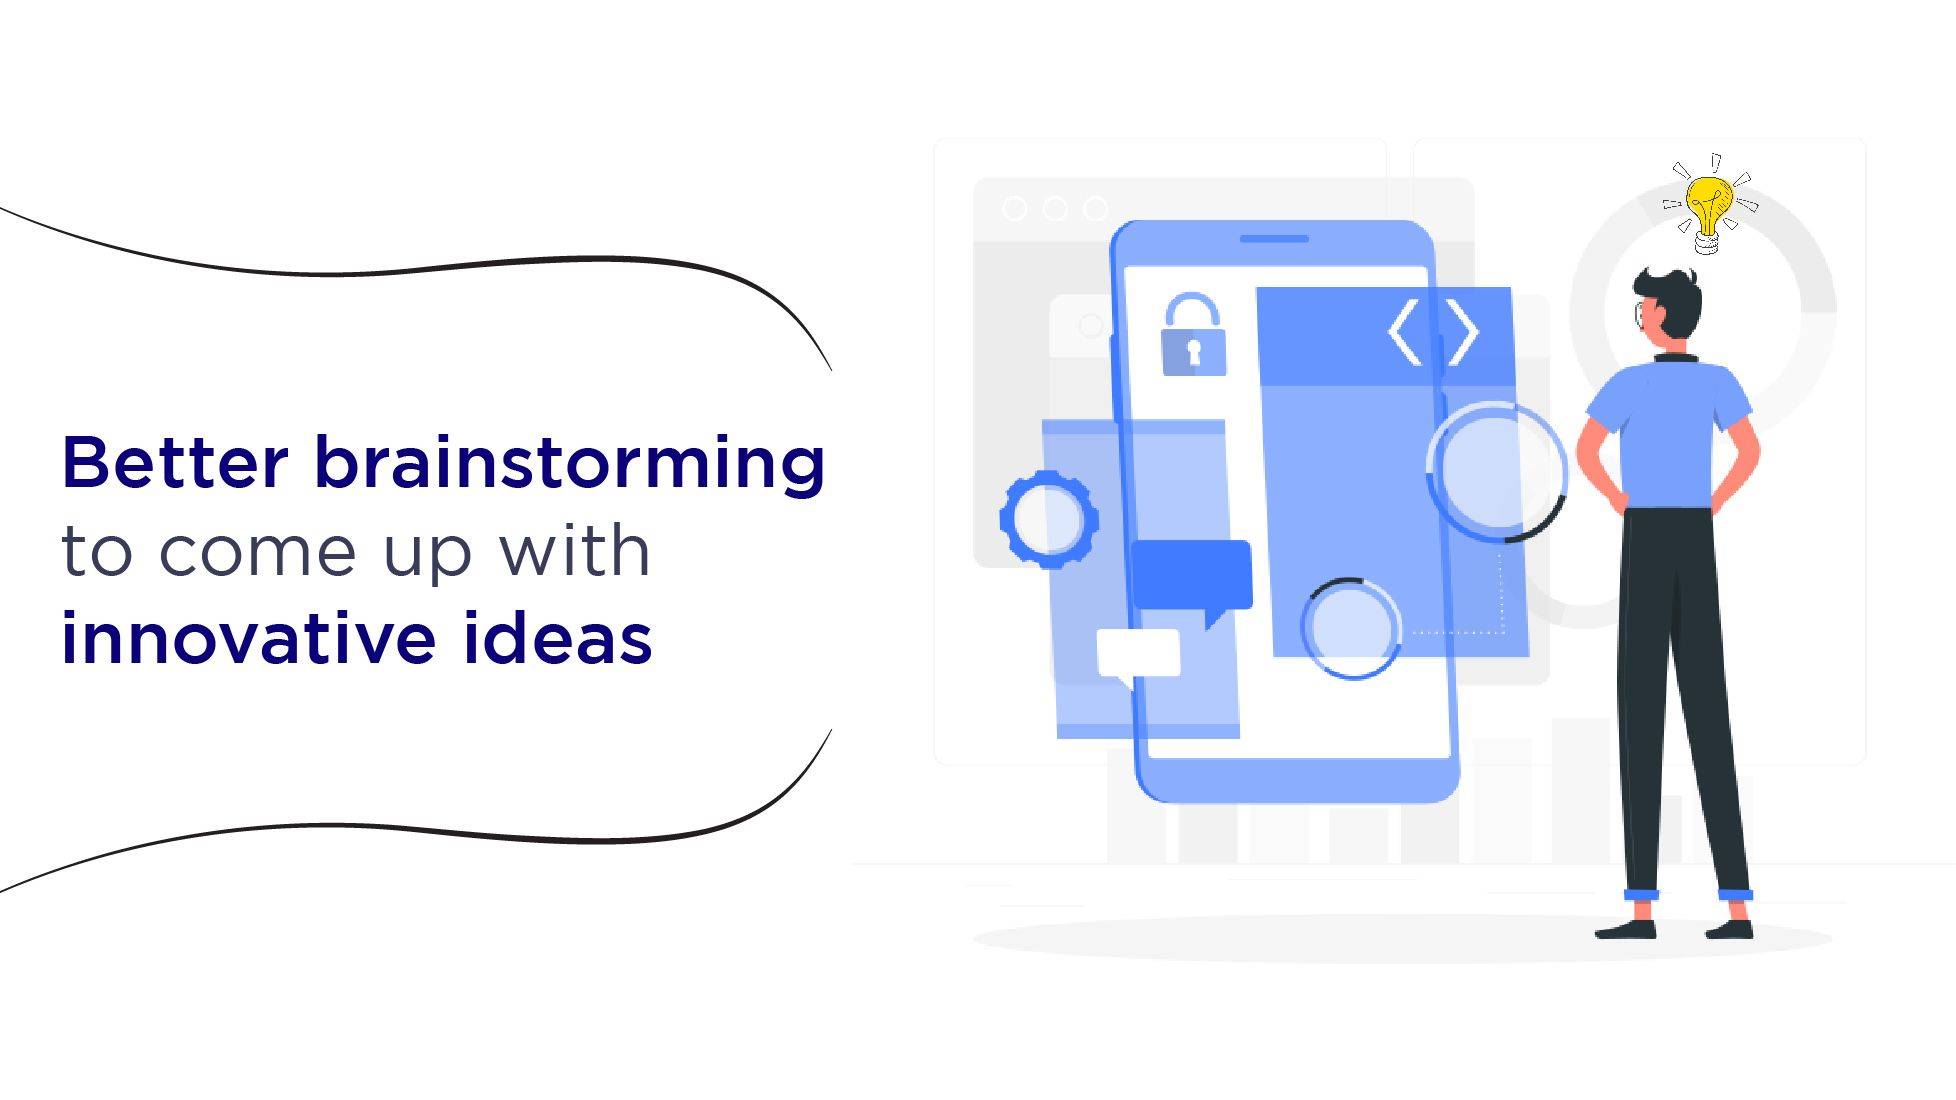 Better brainstorming to come up with innovative ideas